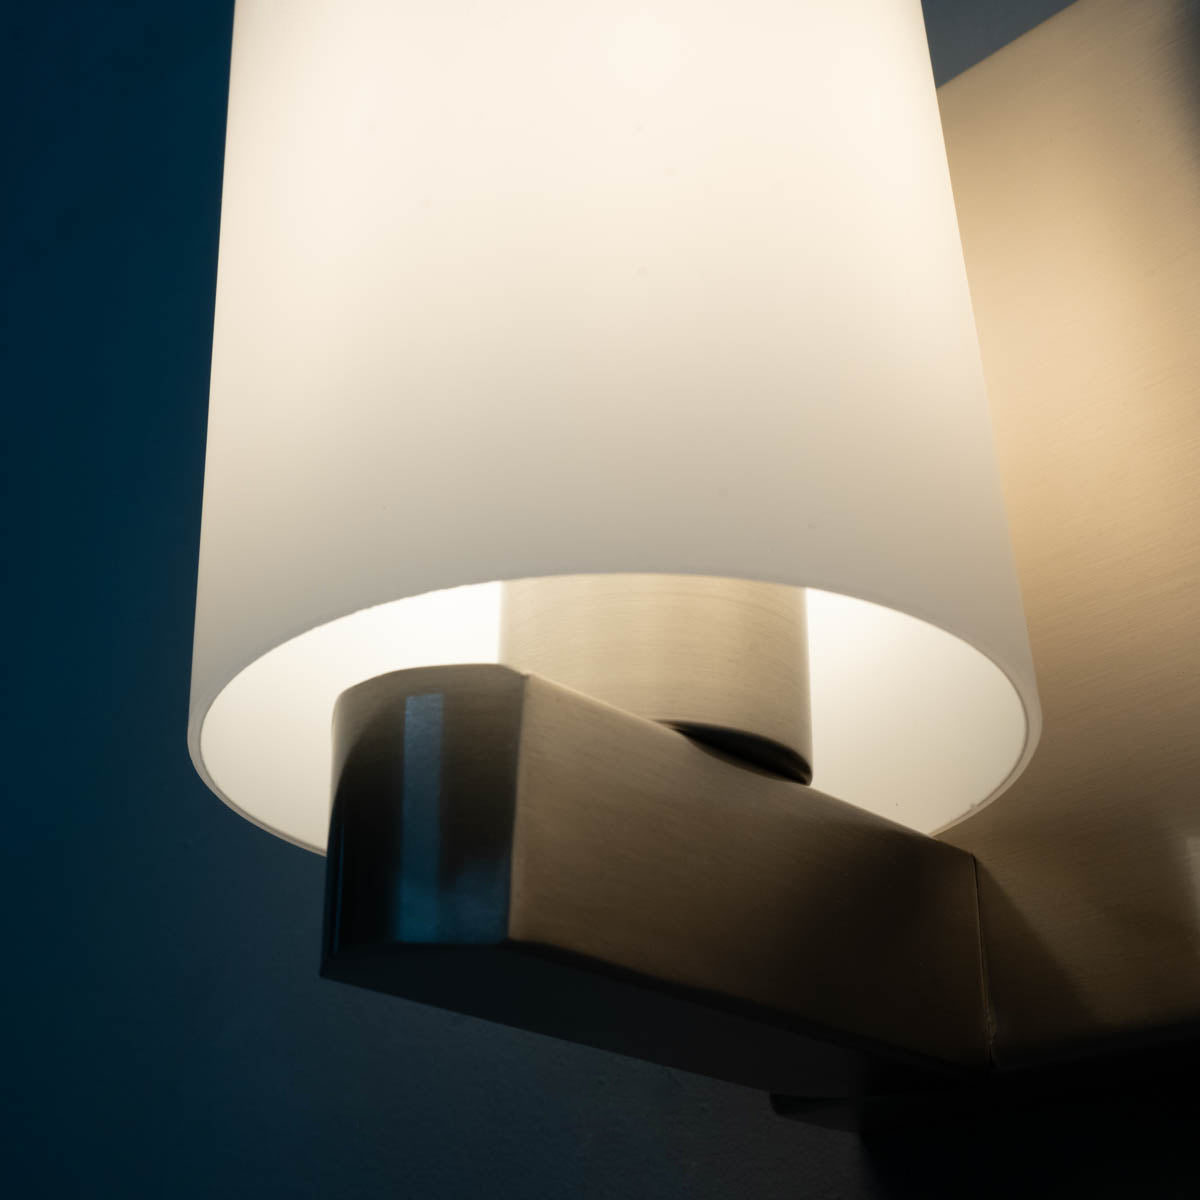 Philips Trunk Wall light